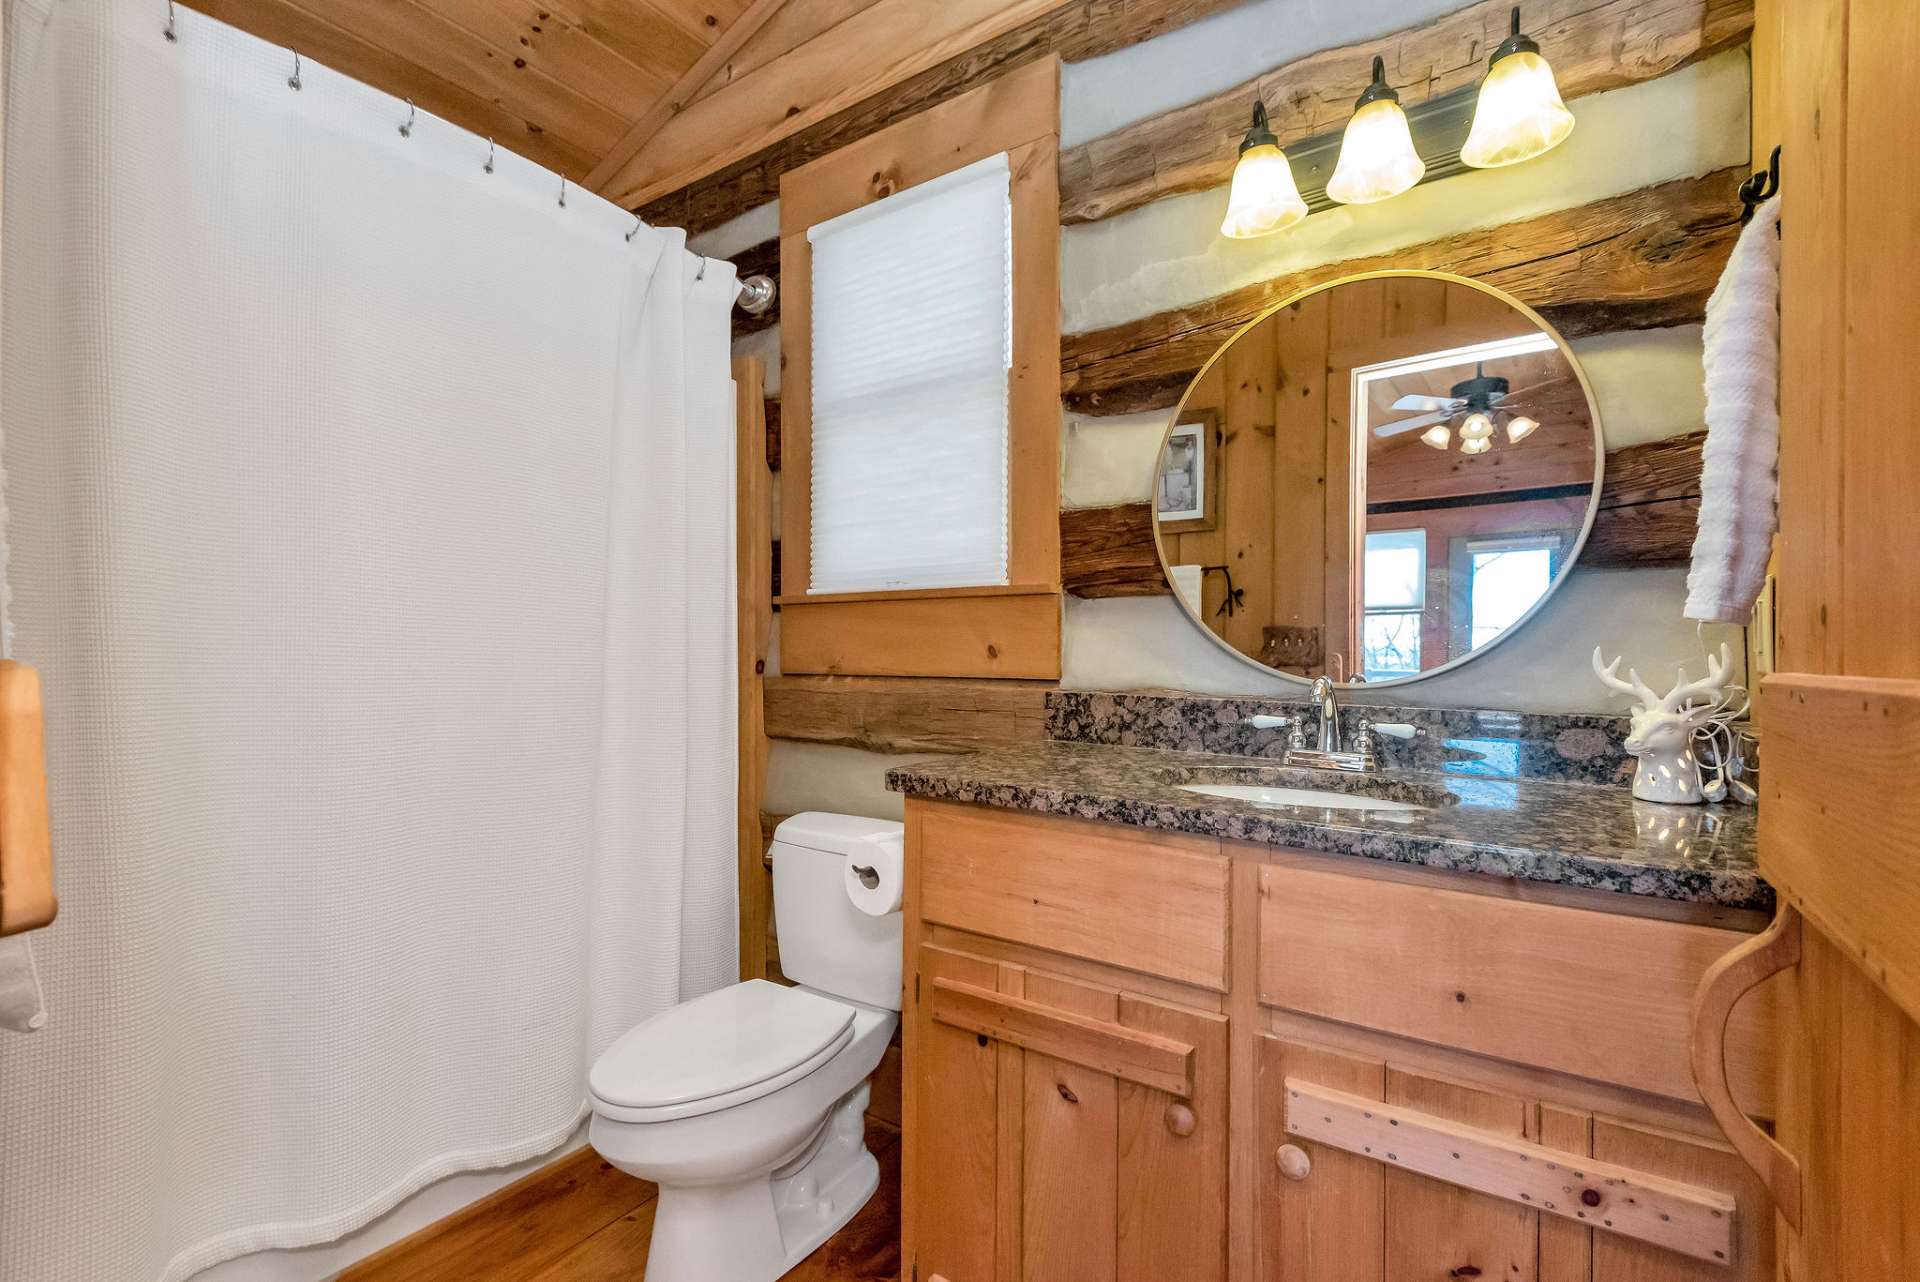 Main level full bath is located in the primary bedroom with granite countertops and shower/tub combo.